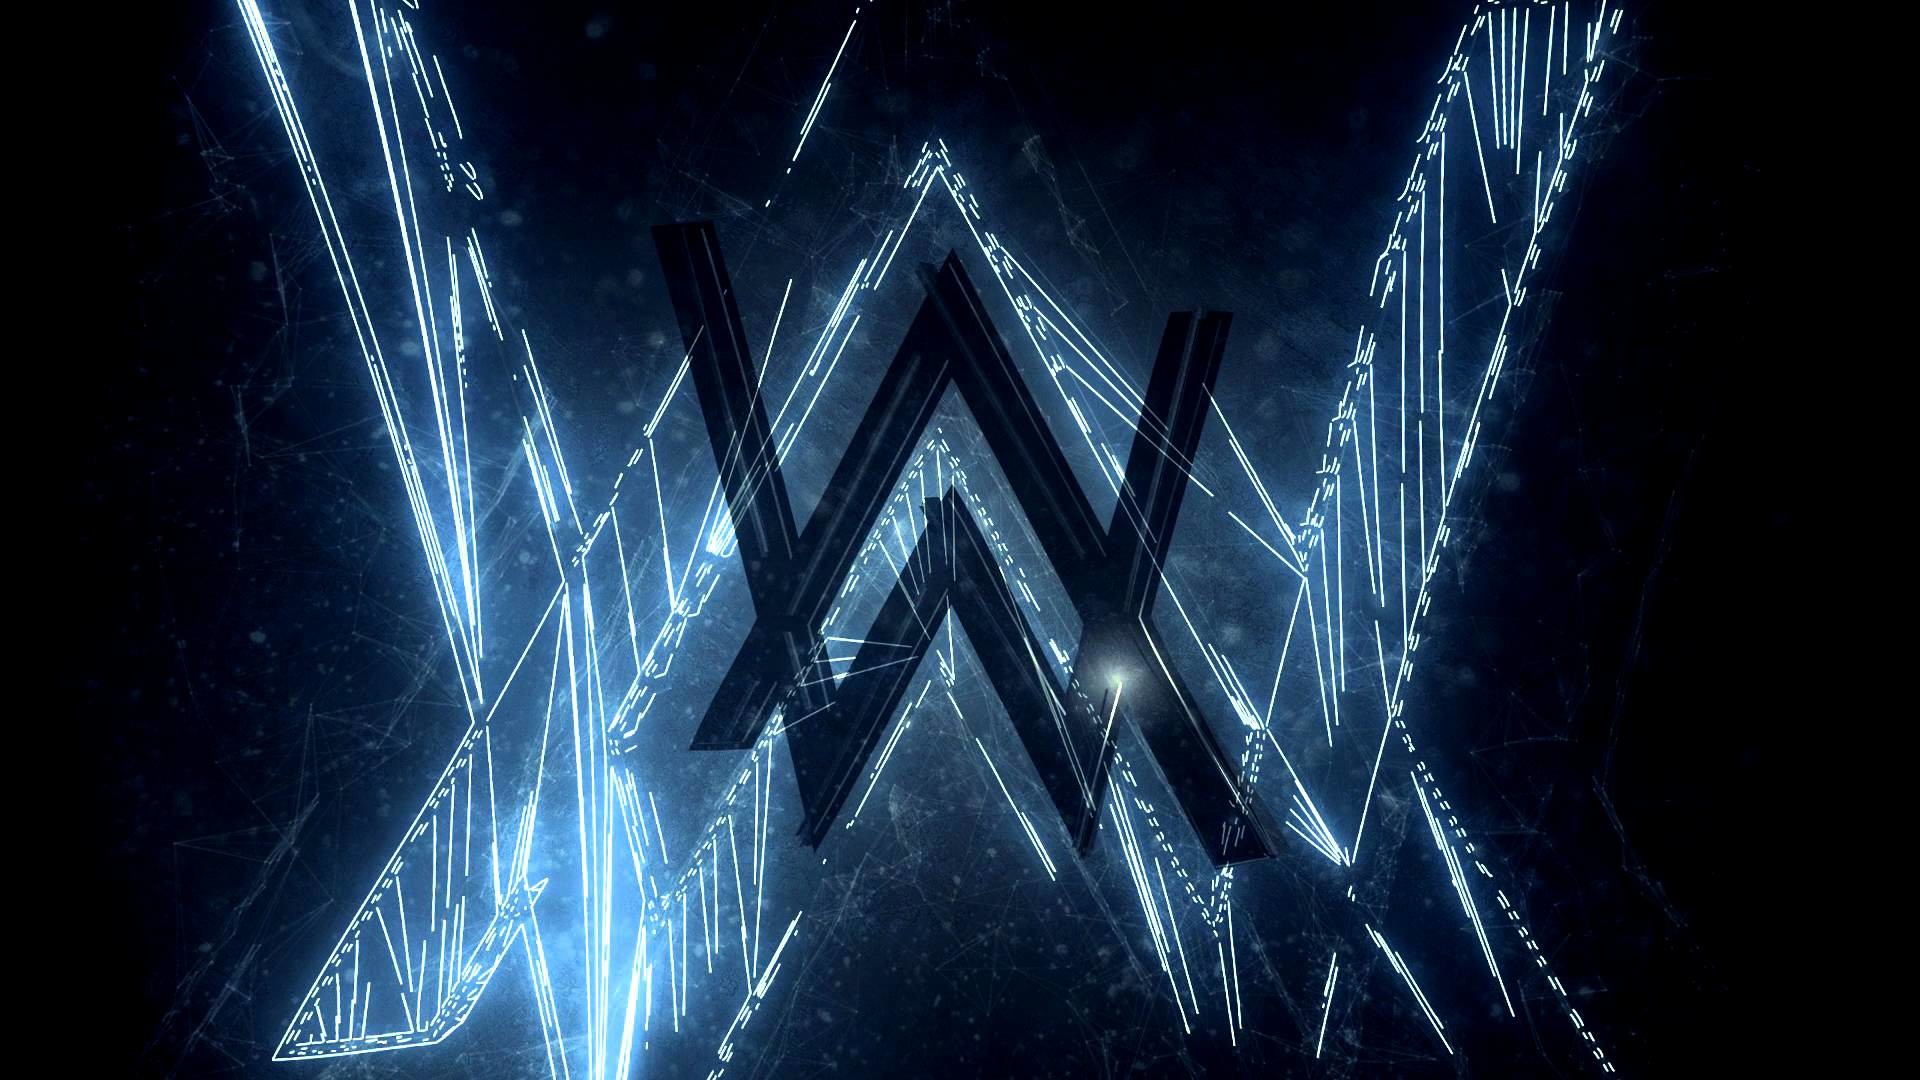 1920x1080 I have found some awesome Alan Walker wallpapers you might like here, feel  free to check them out: